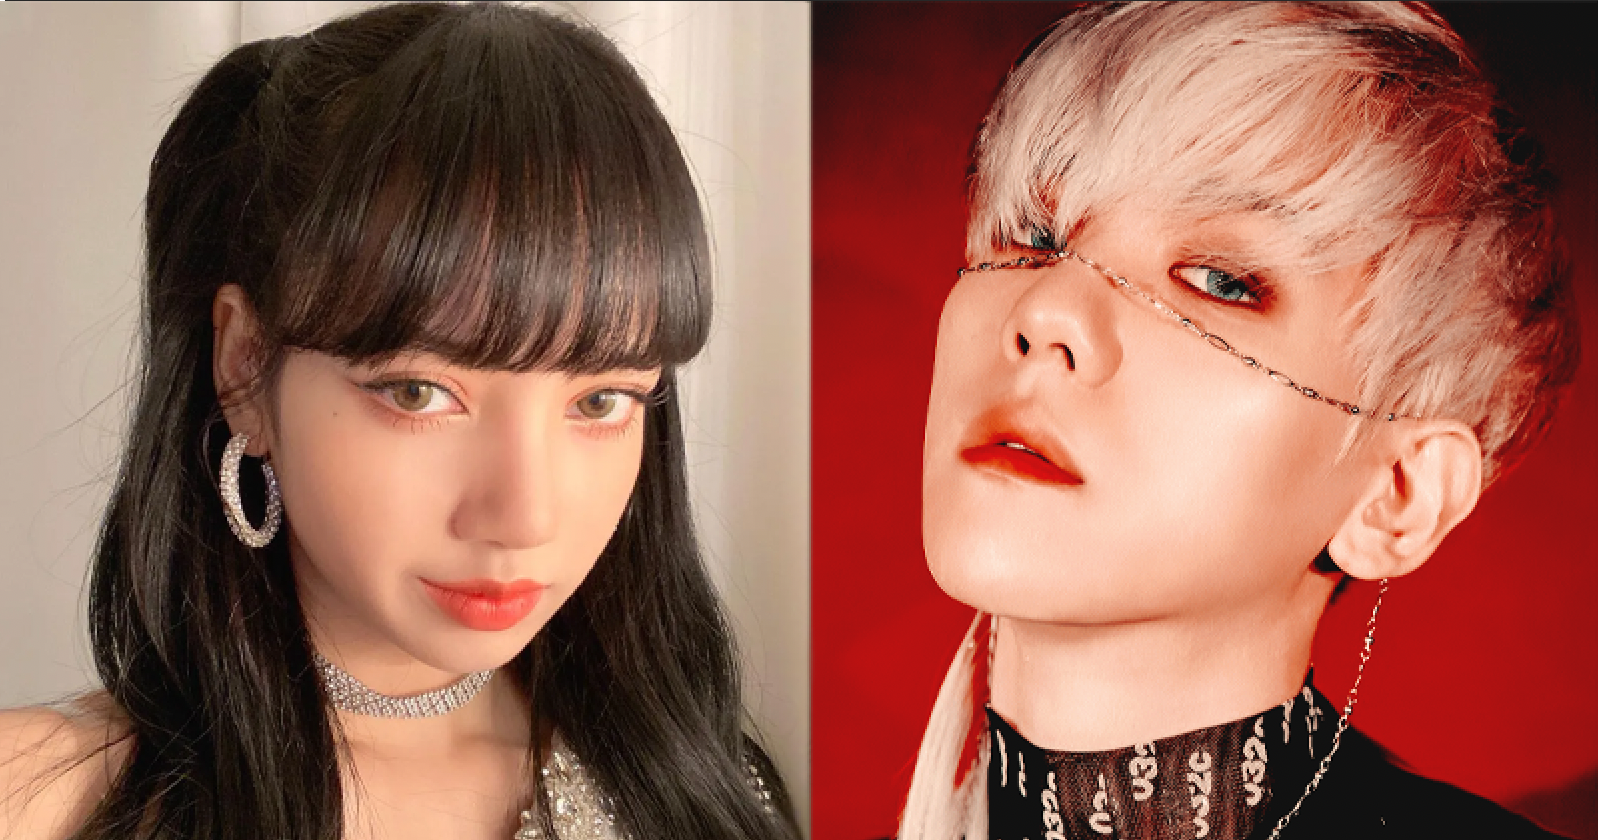 Popular Hair and Makeup Artists Behind Many Great K-Pop Looks